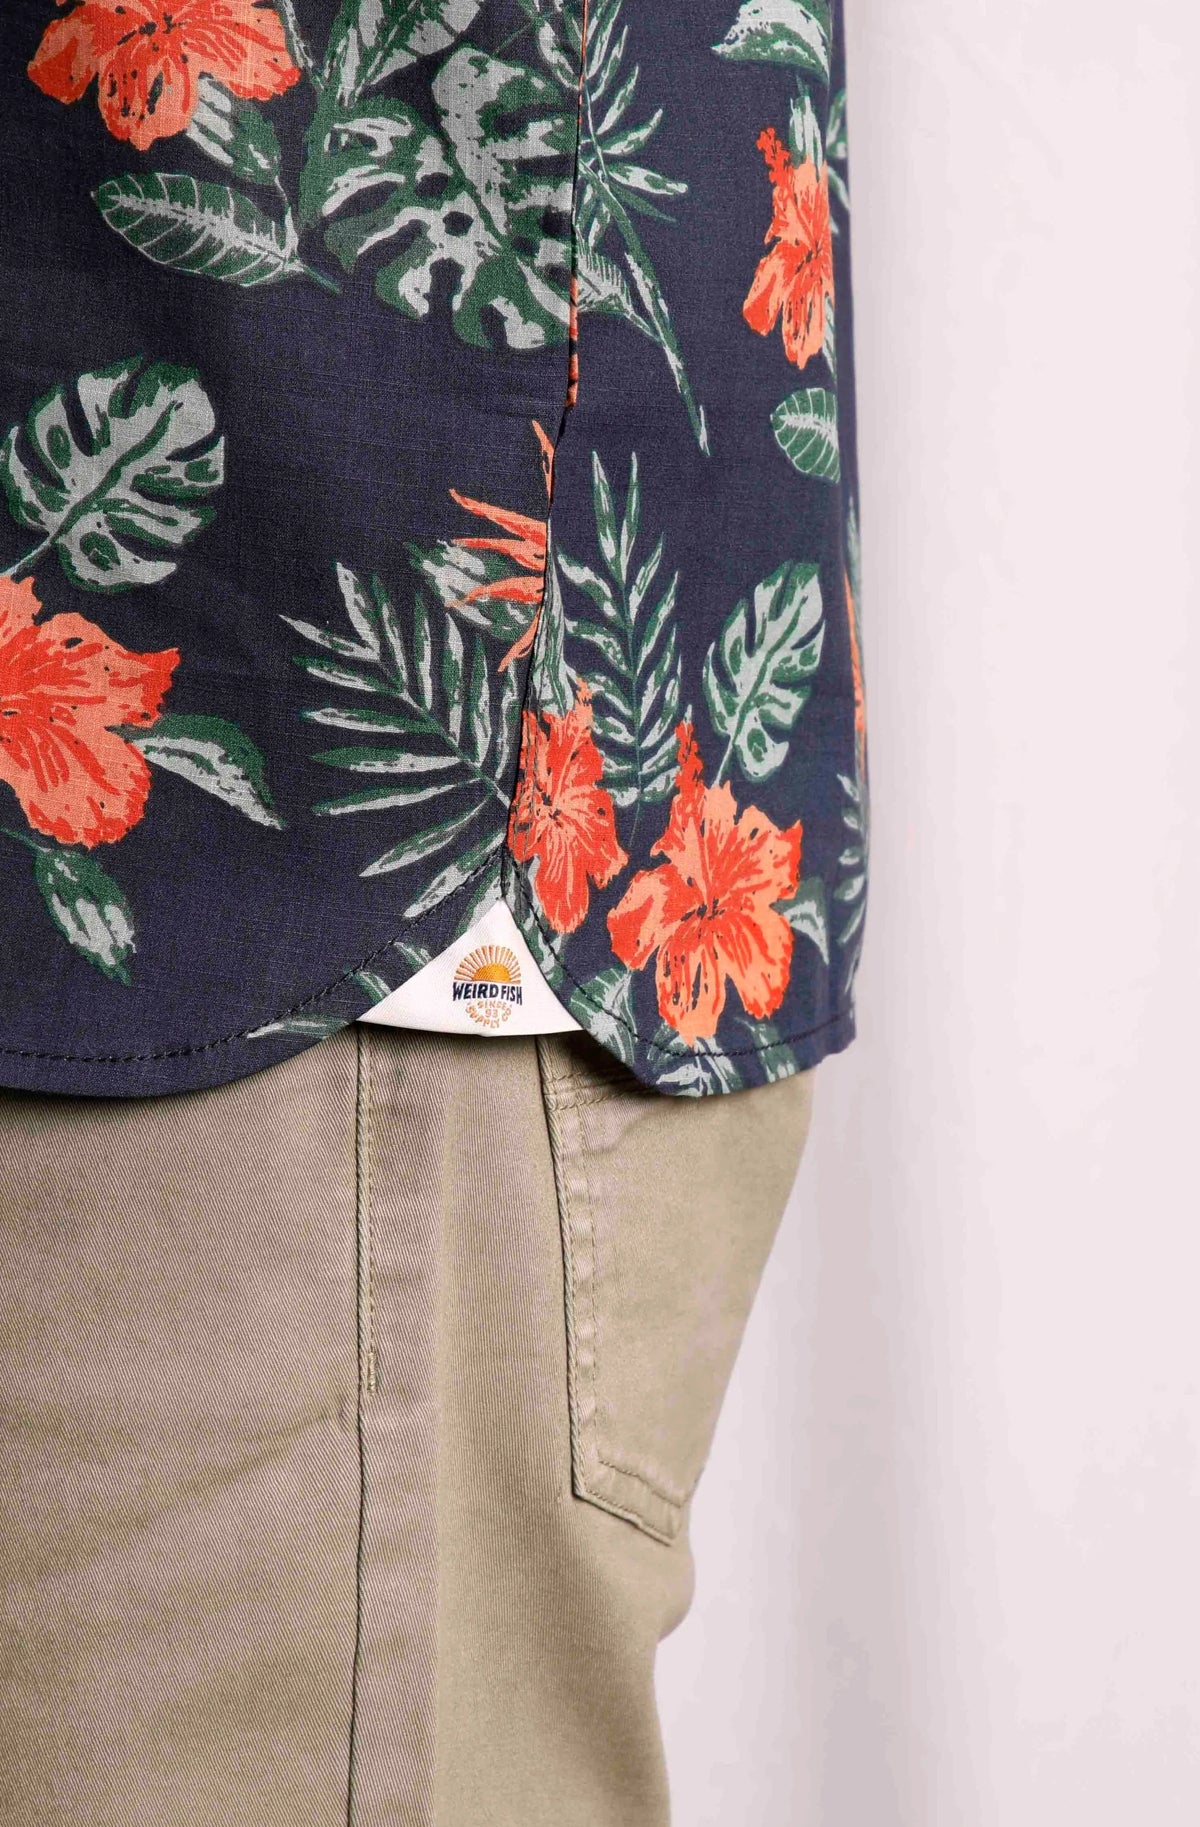 Weird Fish men's Navy tropical floral print shirt with side logo tape detail.